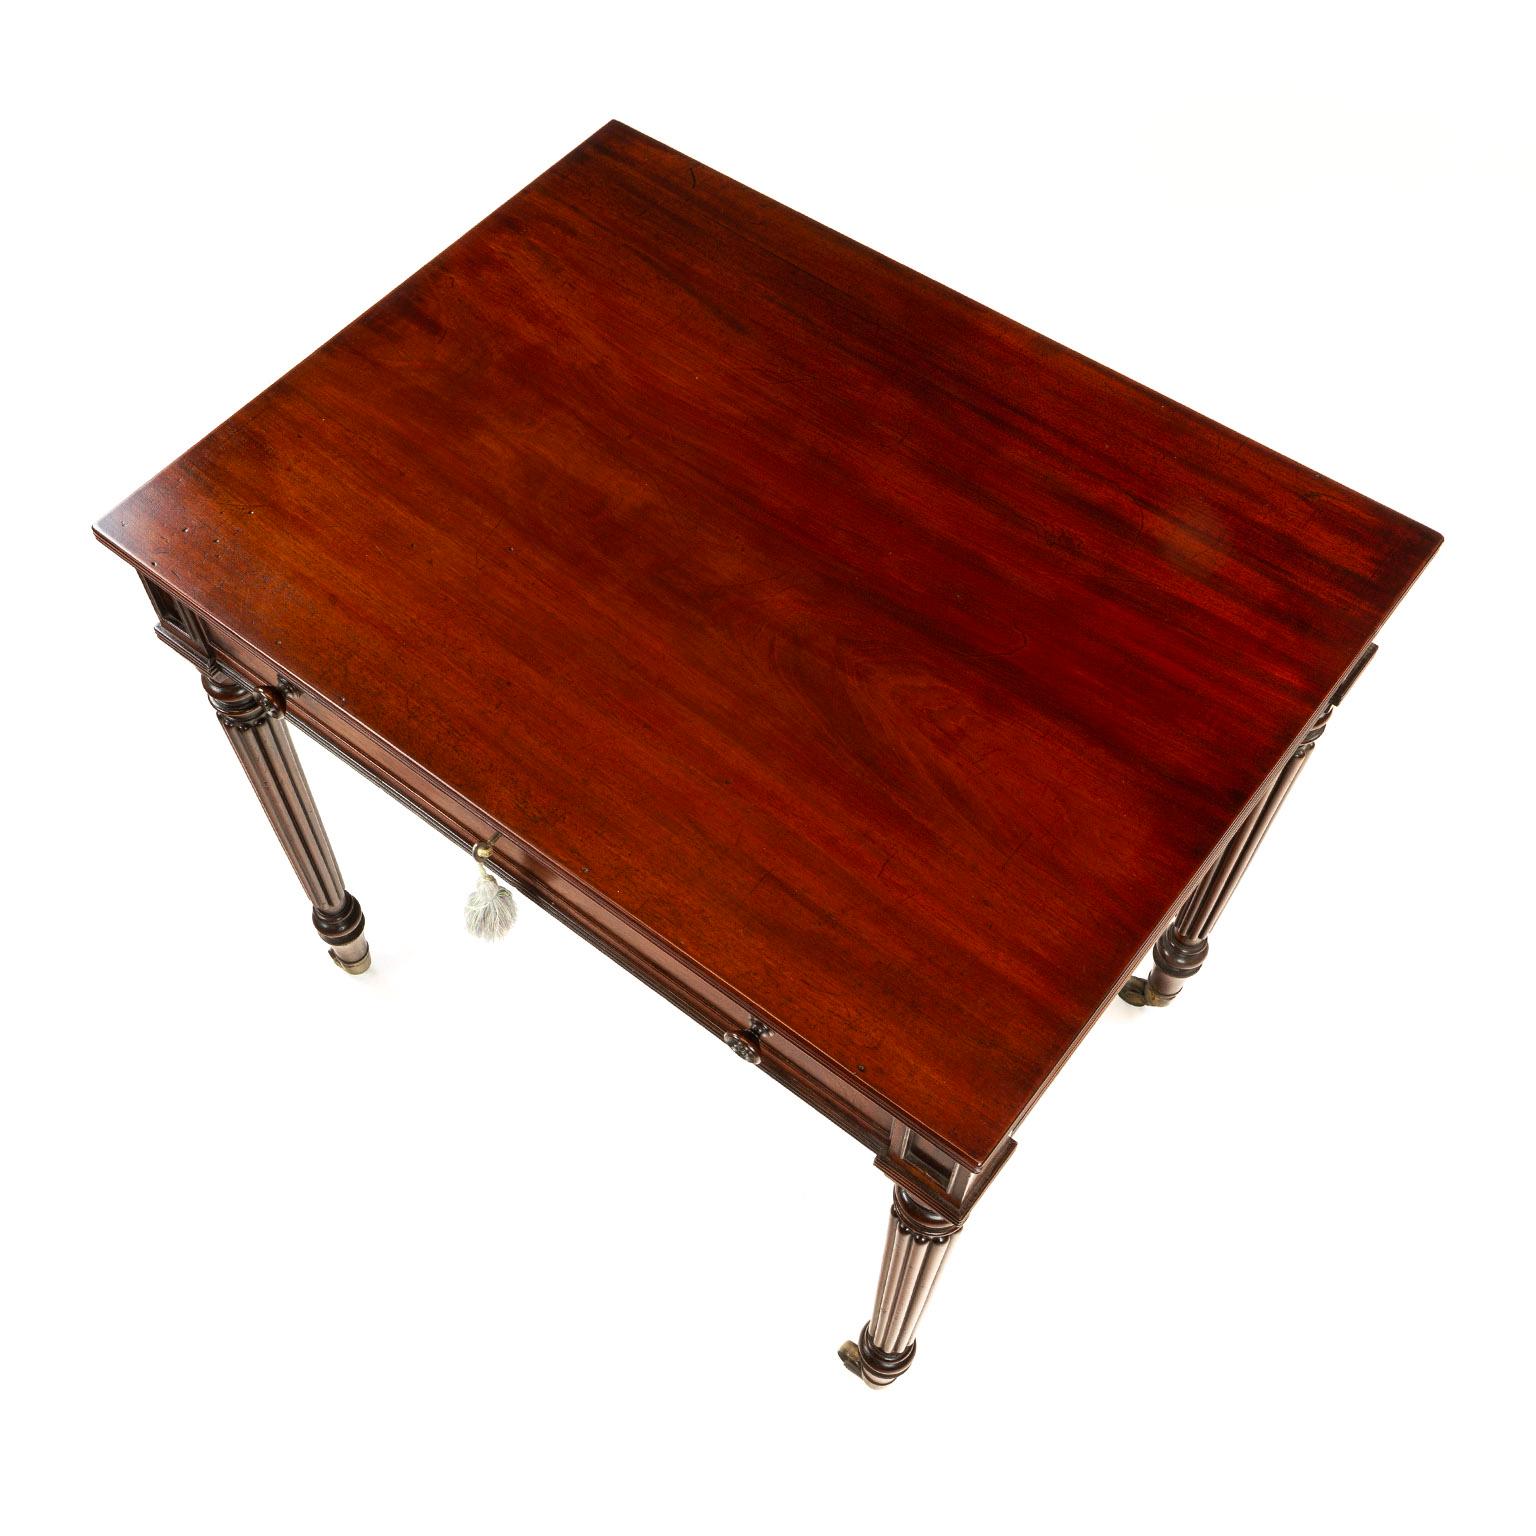 This writing table was produced for a number of years and was a very popular design, collectors tend to keep these writing tables as they show off the Classic Gillows lines but are also a very useful item to use. this item is signed Gillows